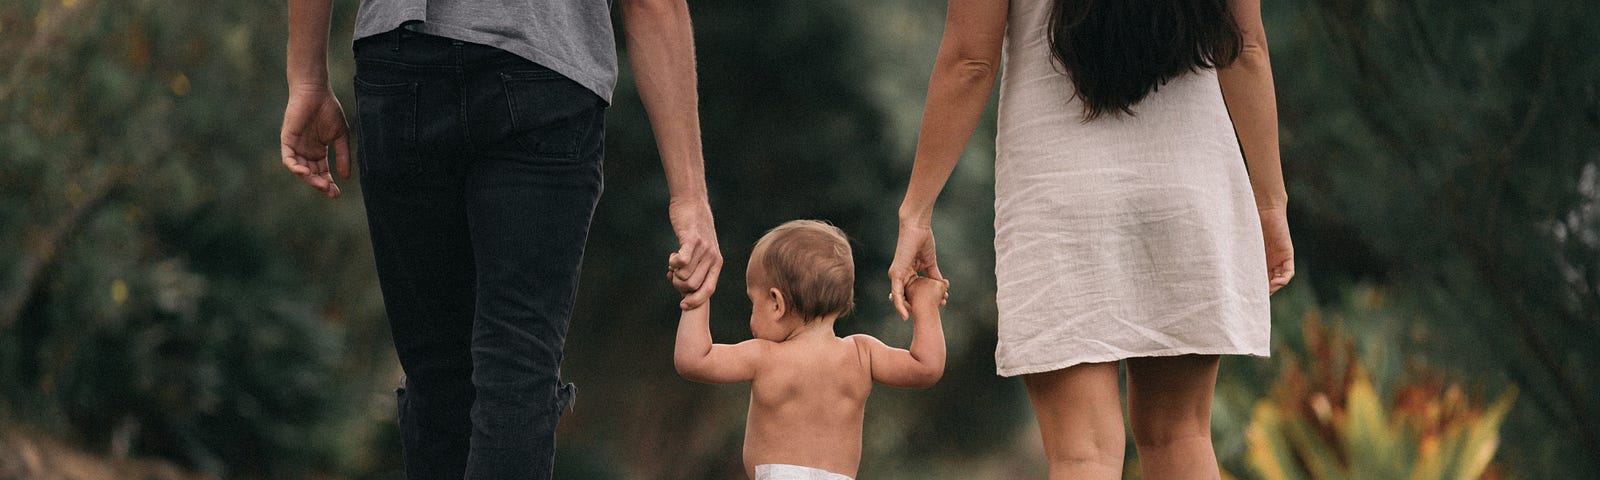 A man and a woman walking with a baby/ toddler between them, all holding hands.